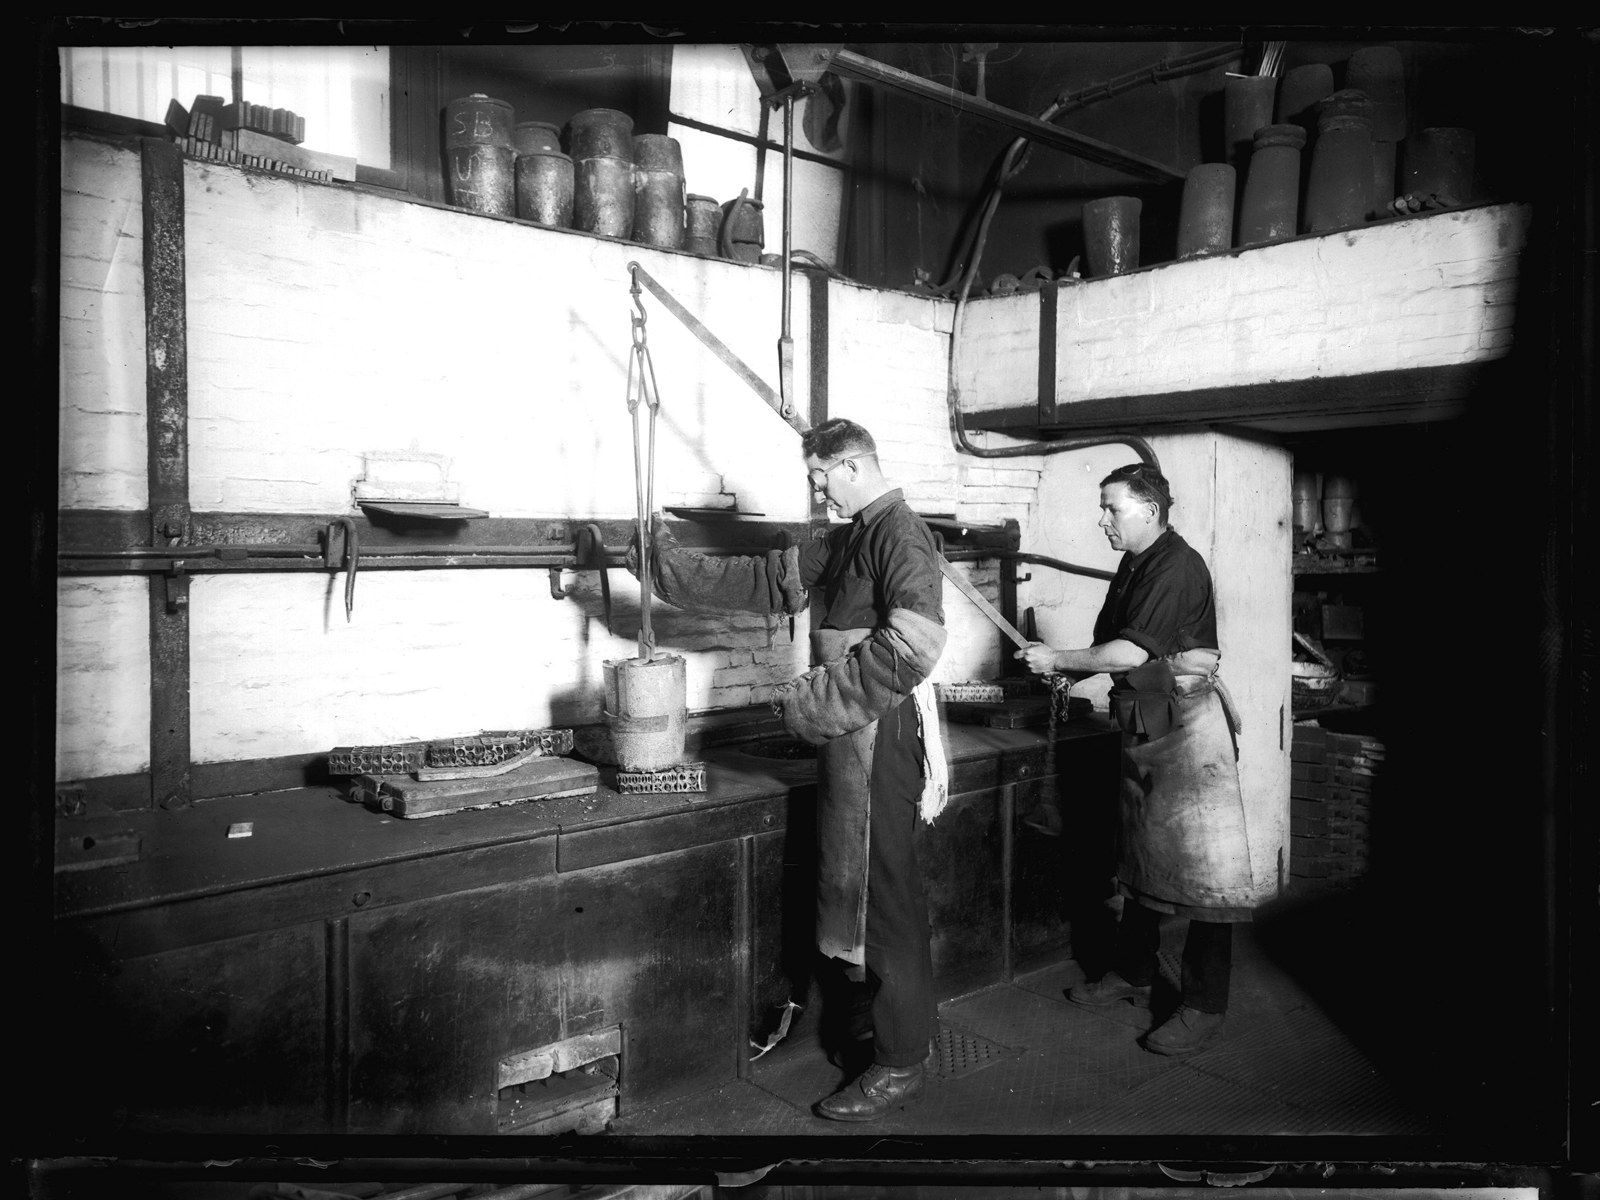 Workmen in the melting room at the Sydney Mint, June 1926